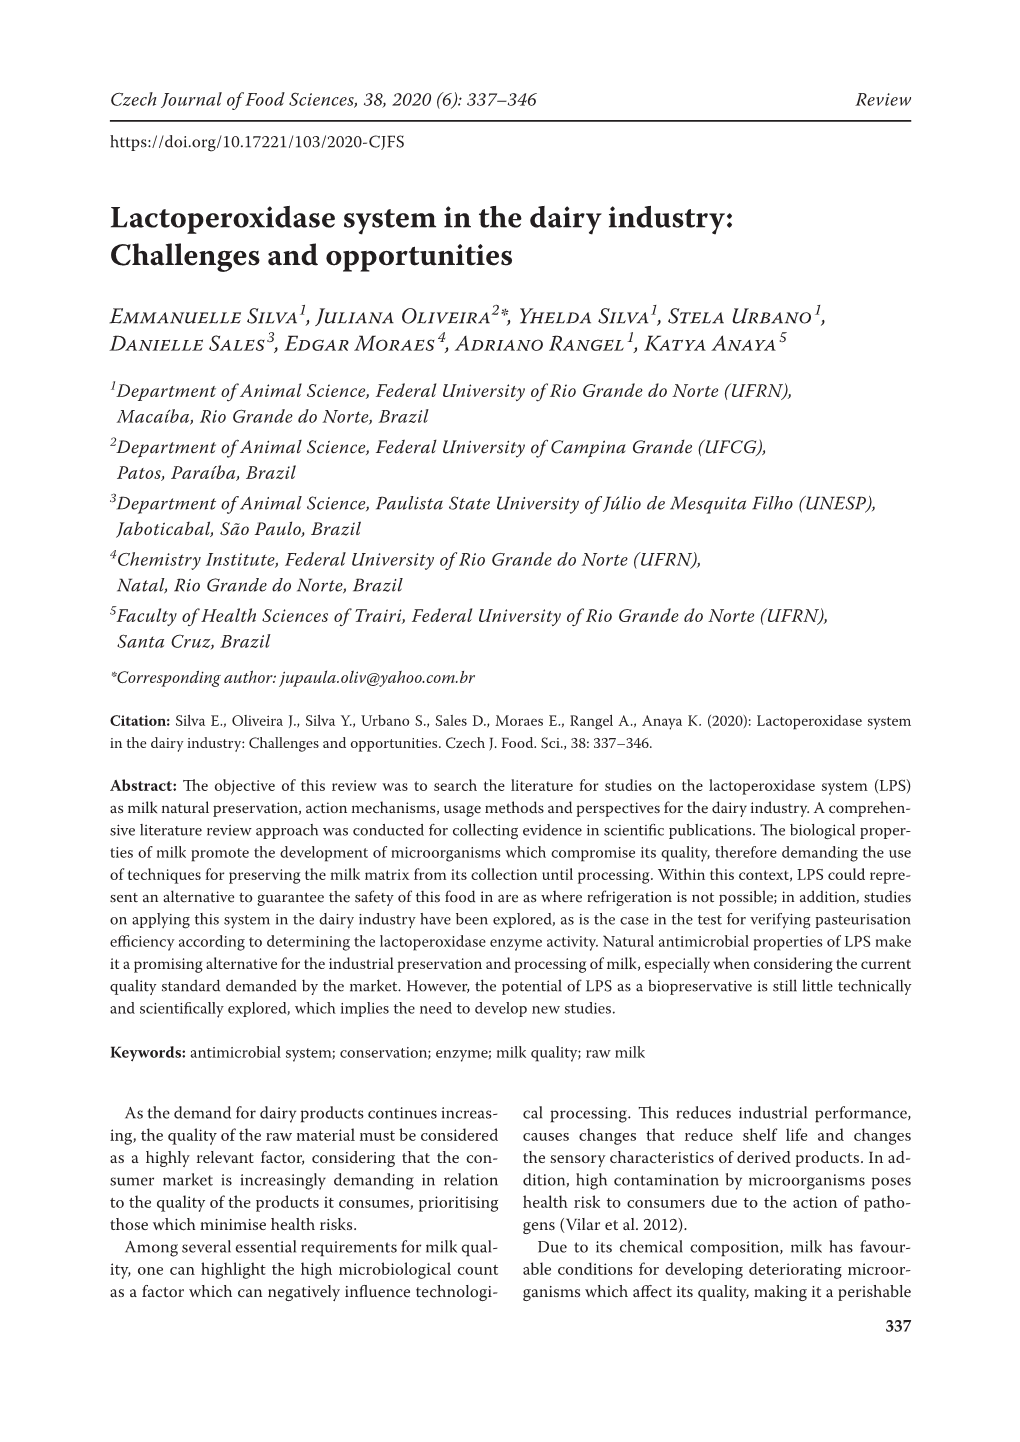 Lactoperoxidase System in the Dairy Industry: Challenges and Opportunities